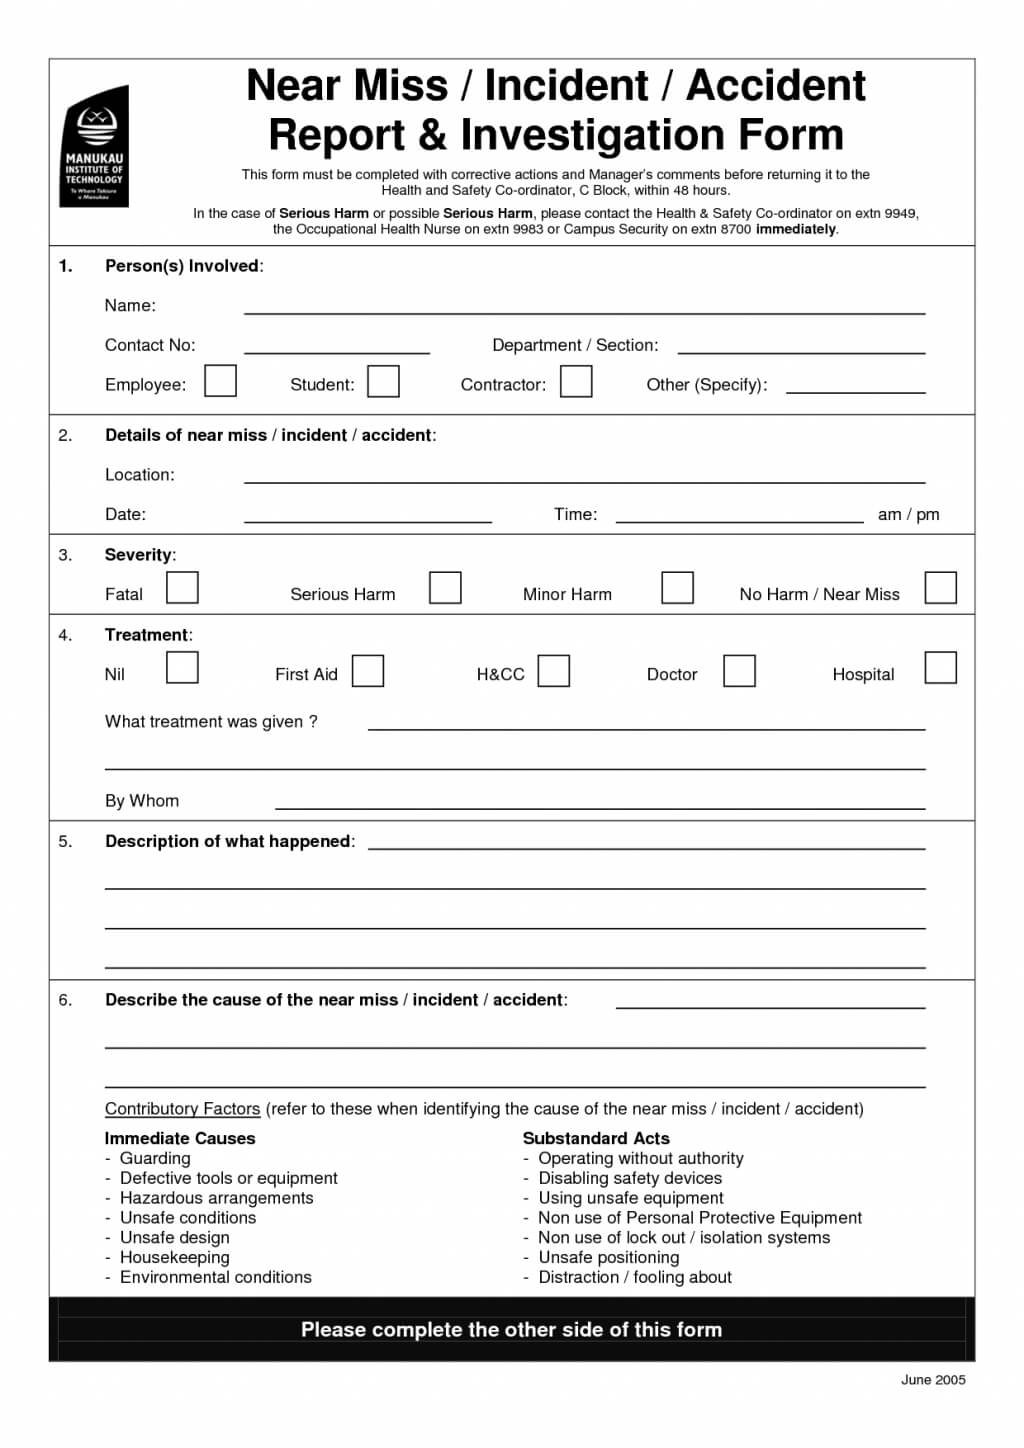 Traffic Ident Investigation Report Format Form Hse Incident Inside Near Miss Incident Report Template